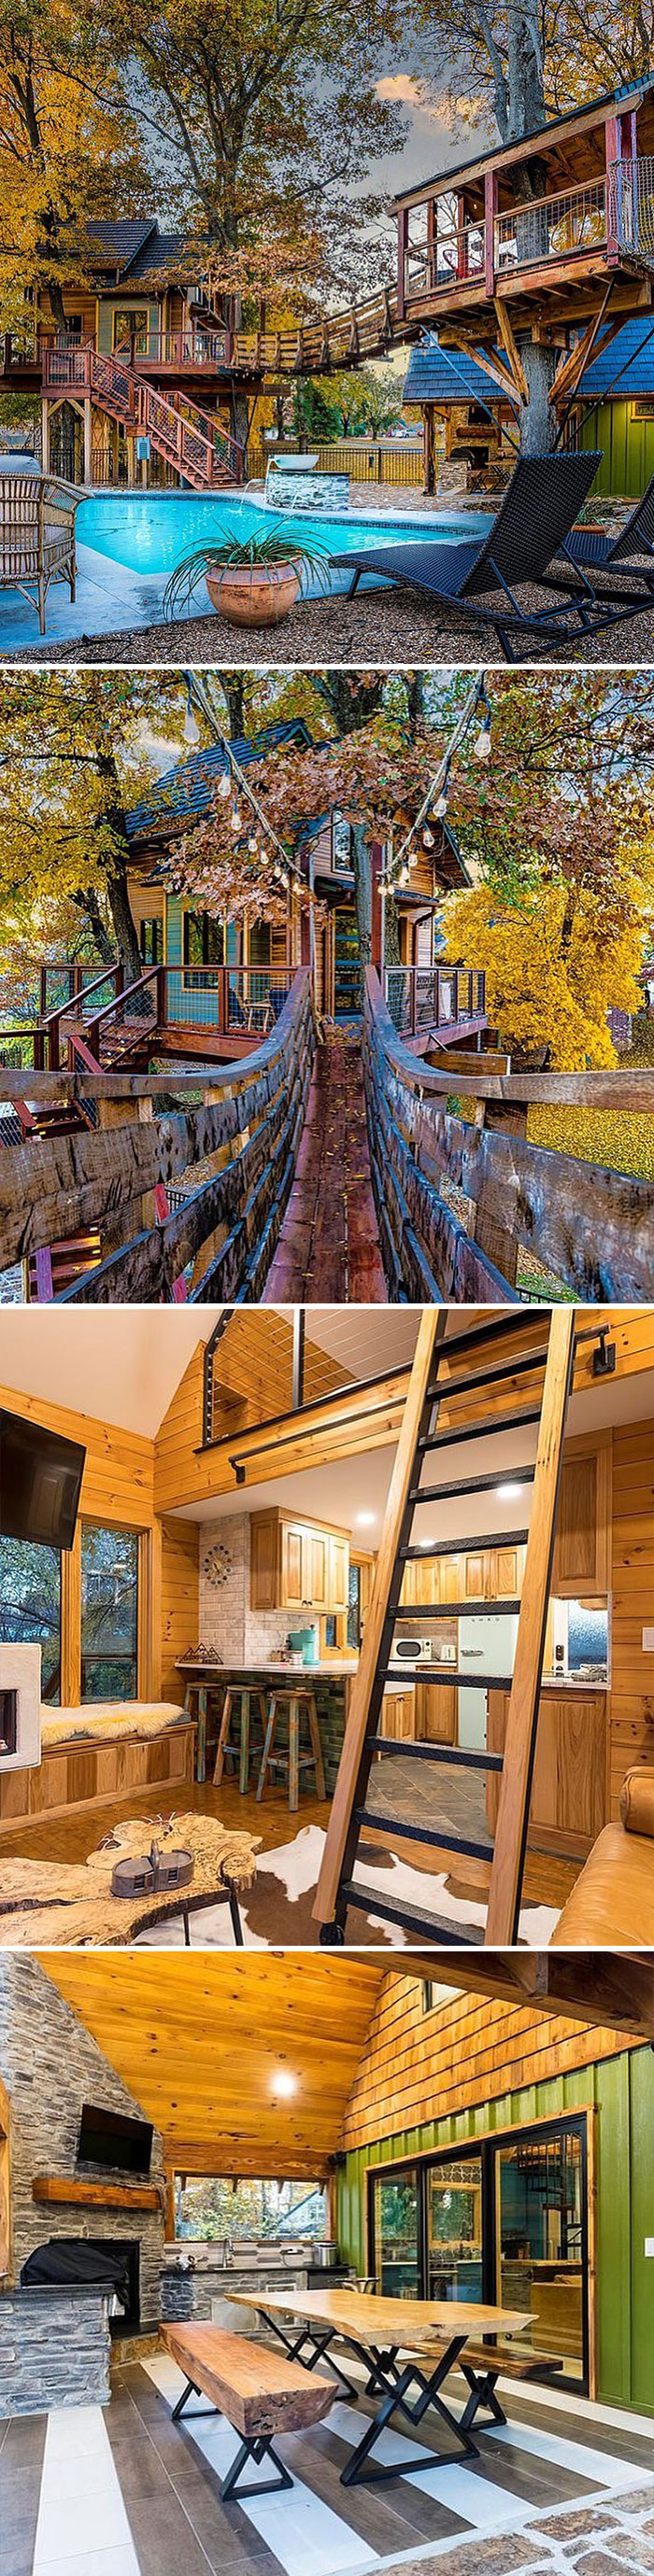 Soooo This Home Comes With A Tree House Back Yard (Sorry, It’s Not A Potato Shed) 🌳🏡. Currently Listed For $1,250,000. 2 Bd, 3 Ba. 866 Sq Ft. Via Zgw Hoa President On Twitter: Davemrosenblatt